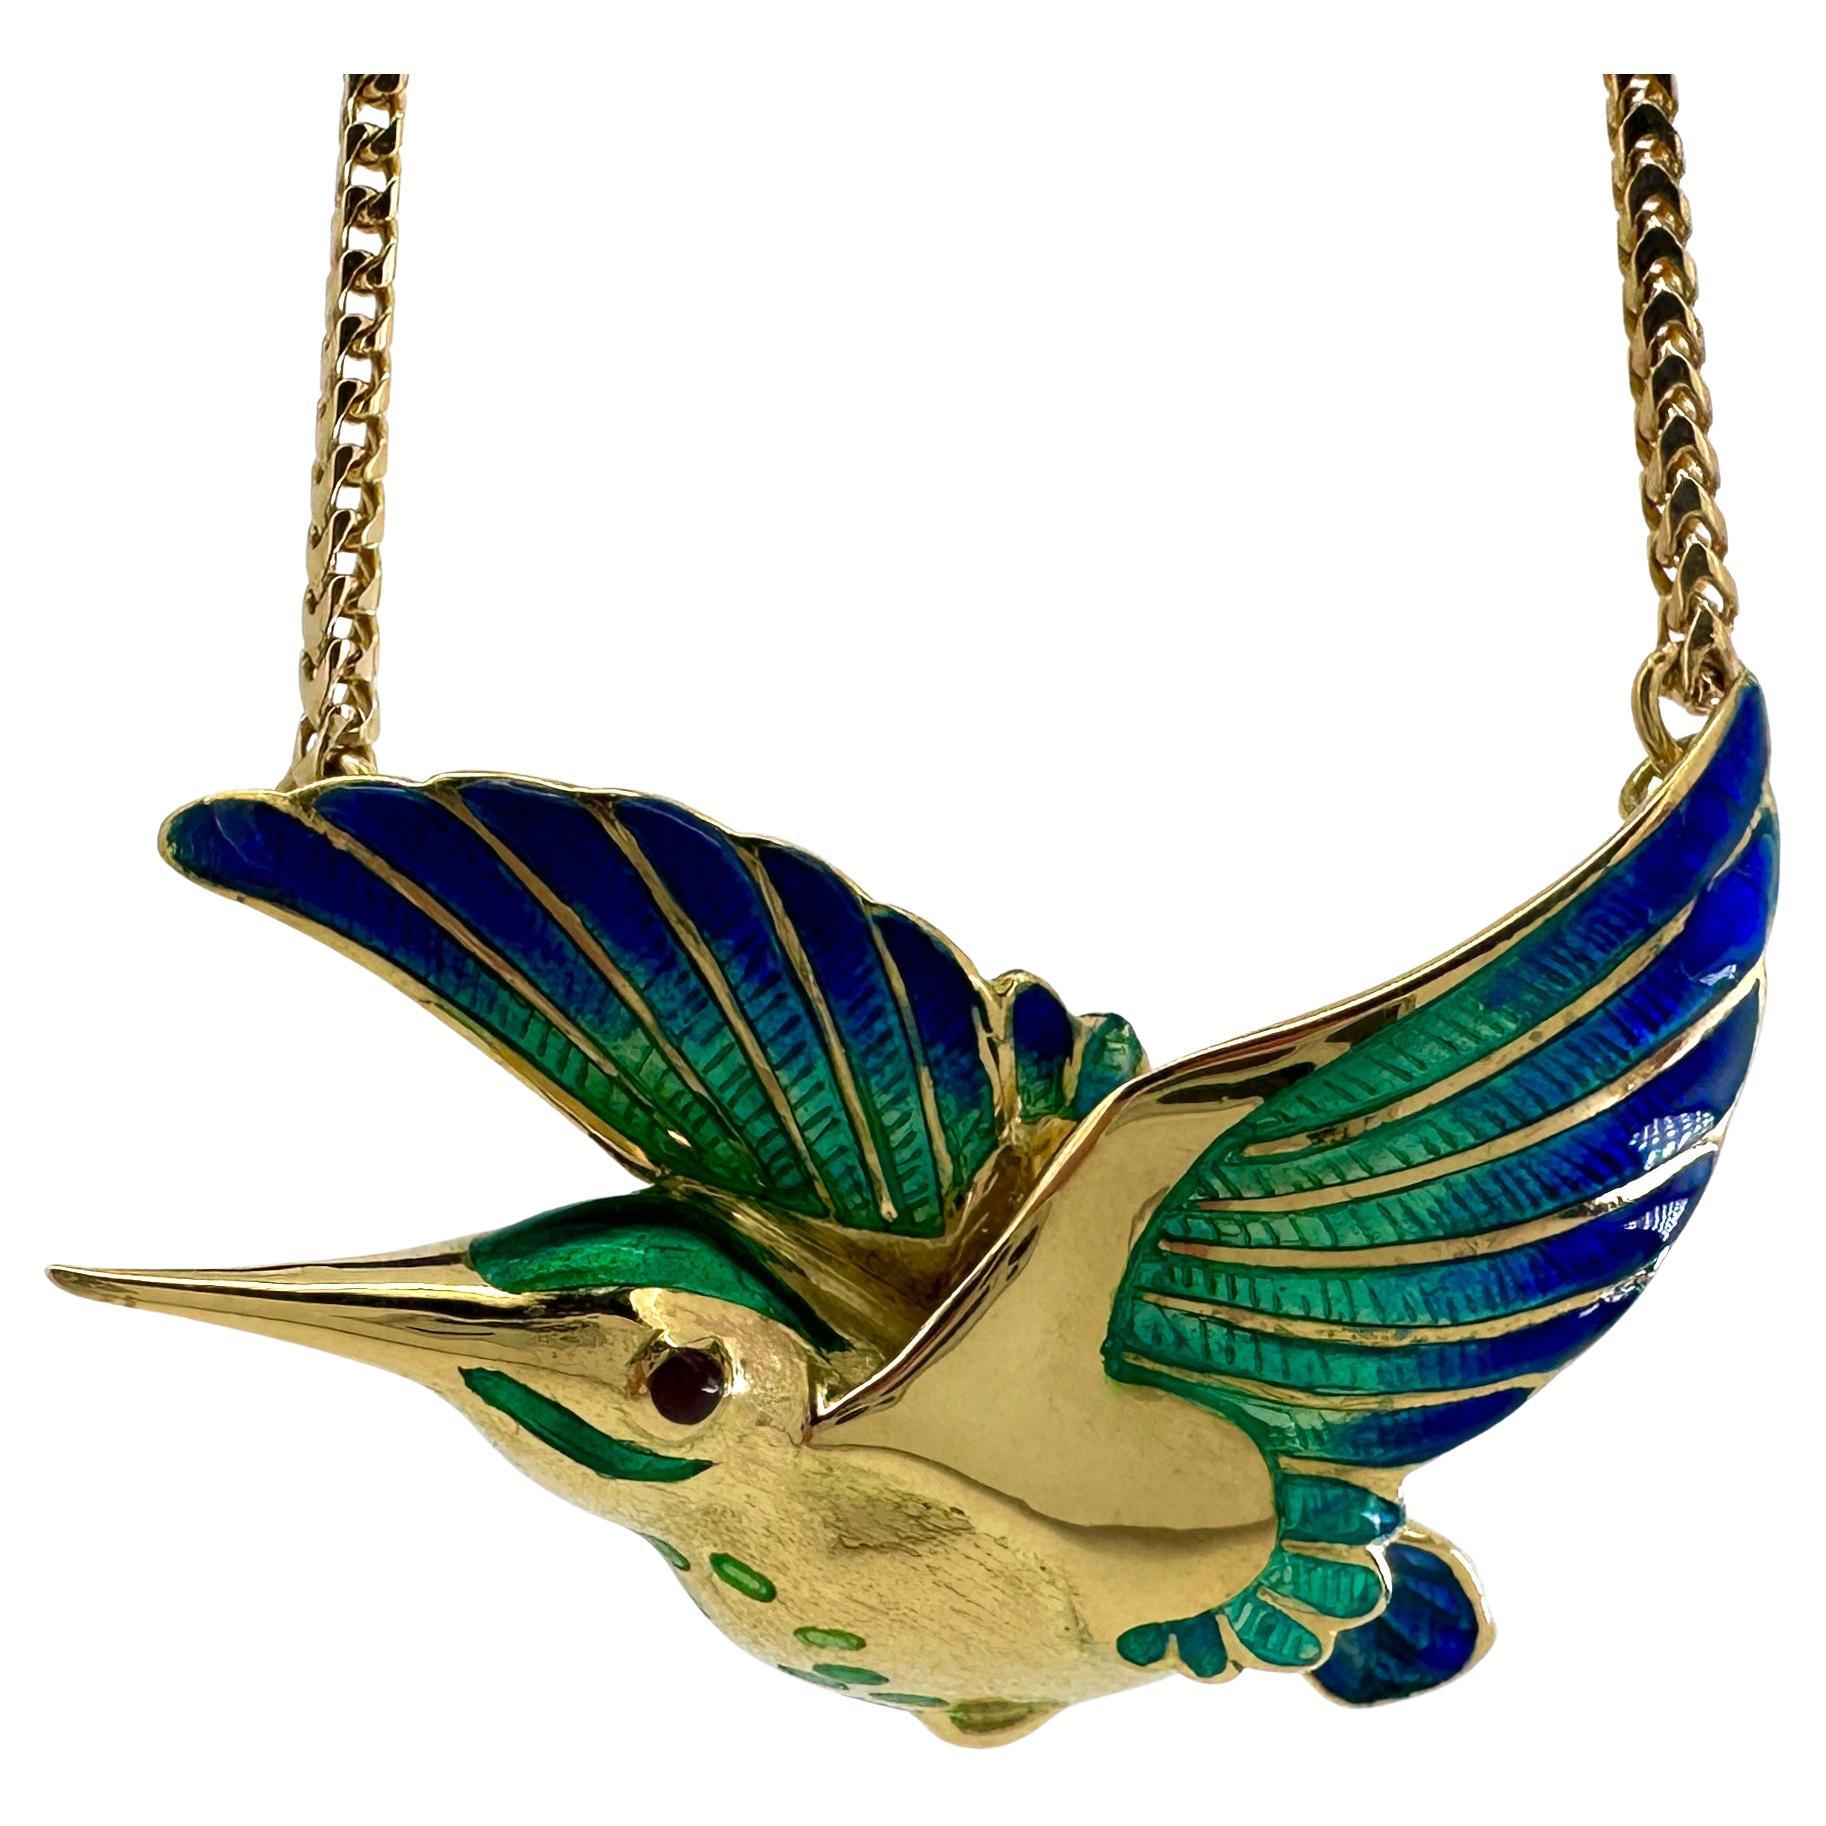 "Hummy" Necklace with 18k Gold Enamel Hummingbird on 14k Franco Link Chain